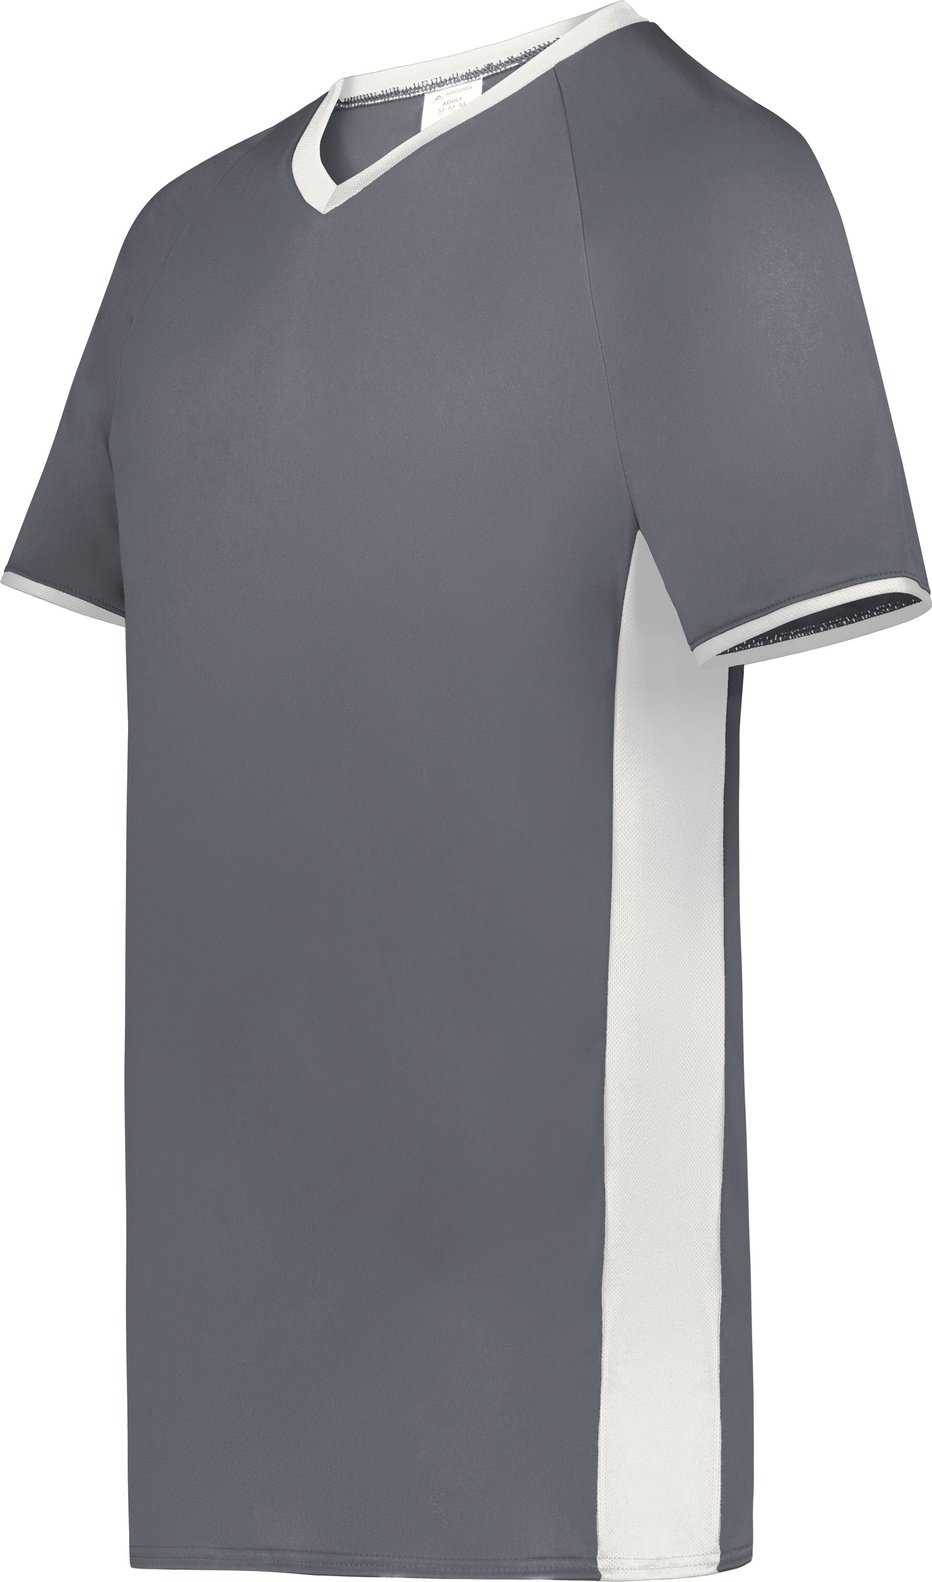 Augusta 6907 Cutter+ V-Neck Jersey - Graphite White - HIT a Double